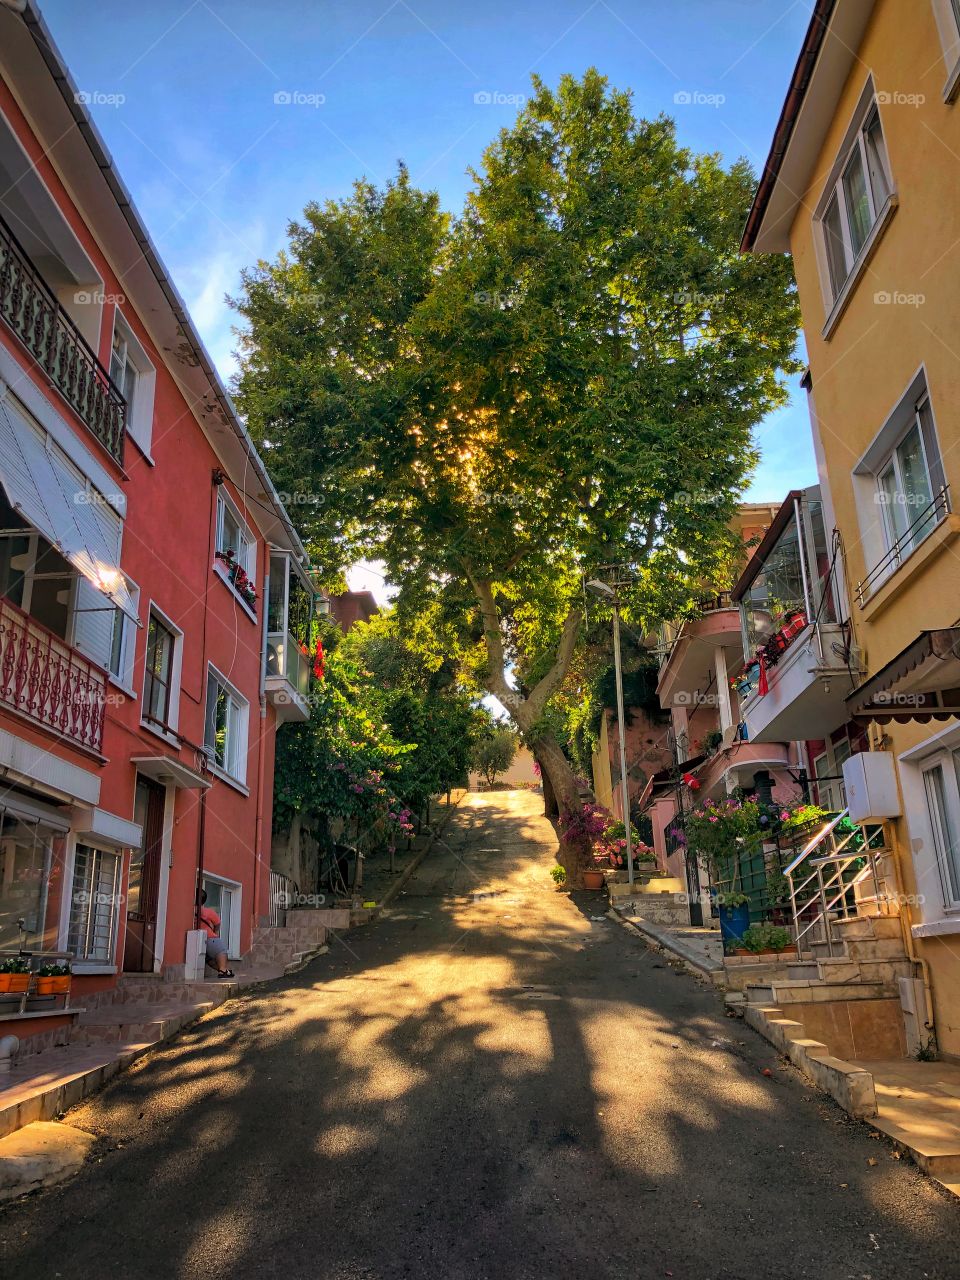 Narrow street in an old town 